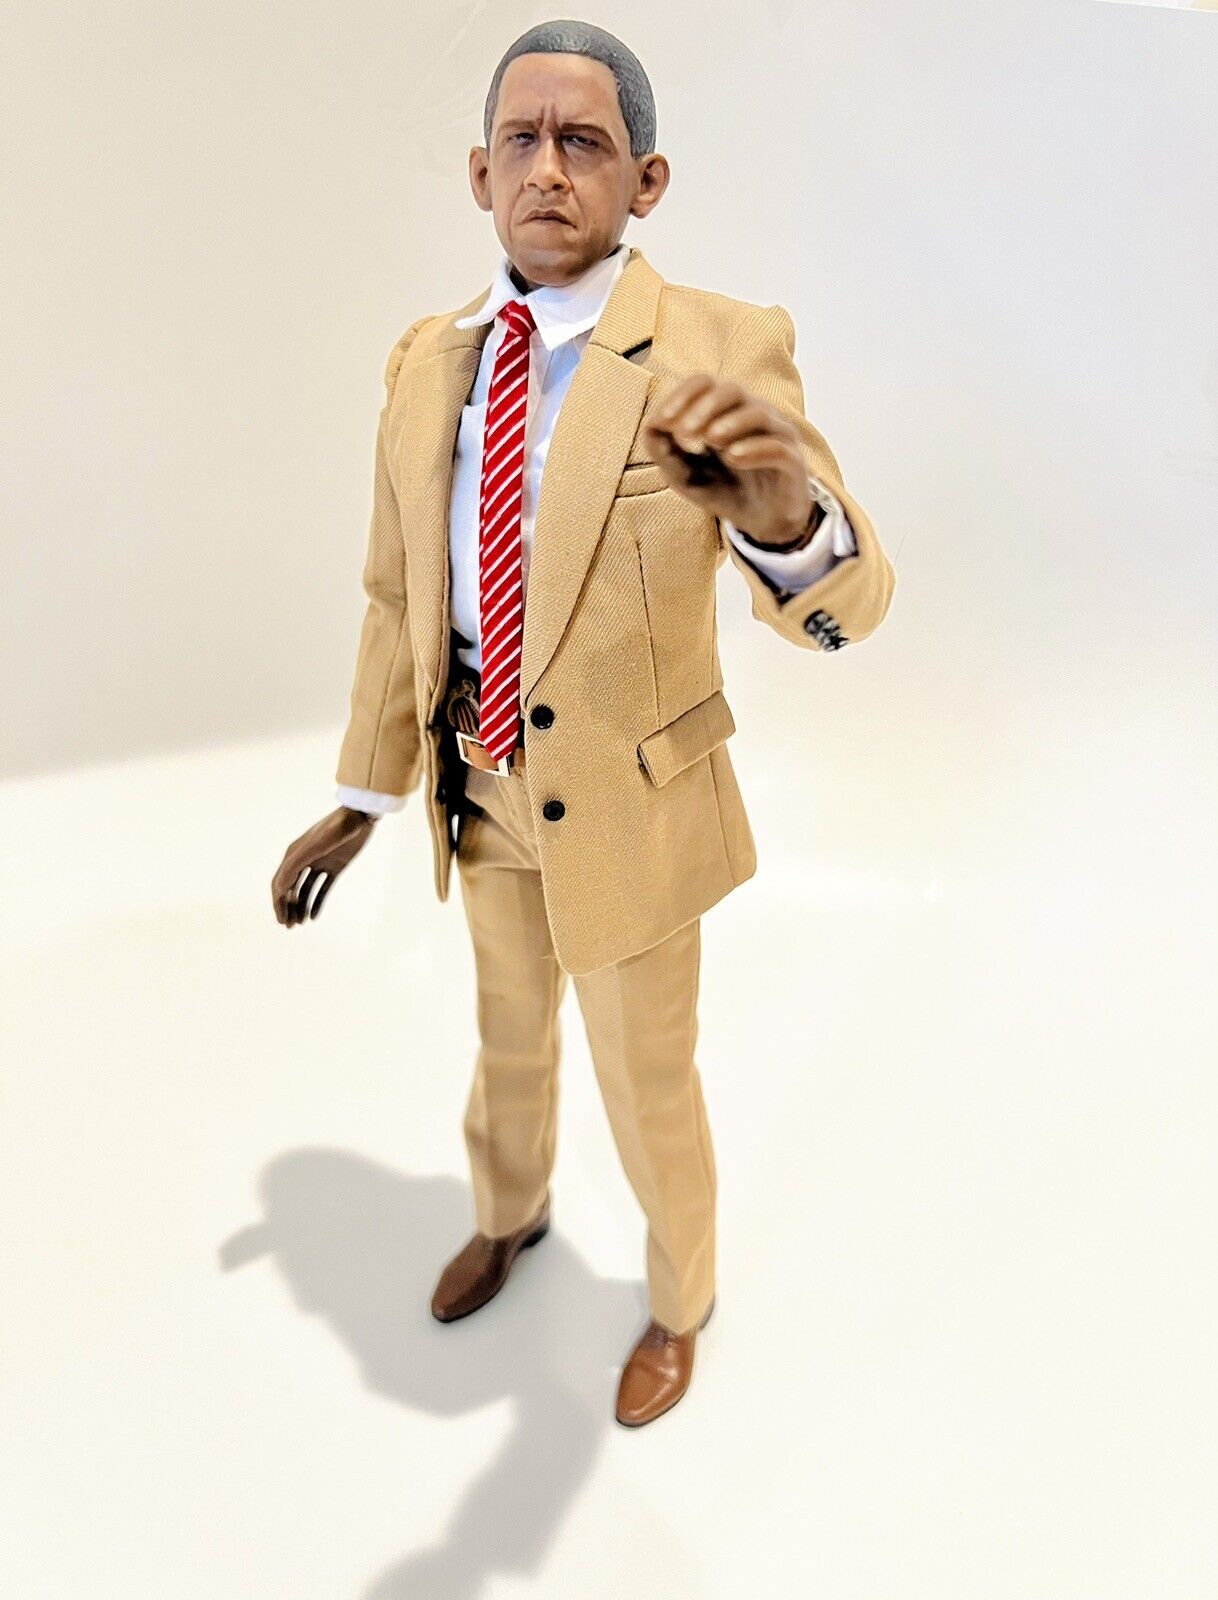 OOAK President Barack Obama 12” Posable Display Collectable Doll Figure